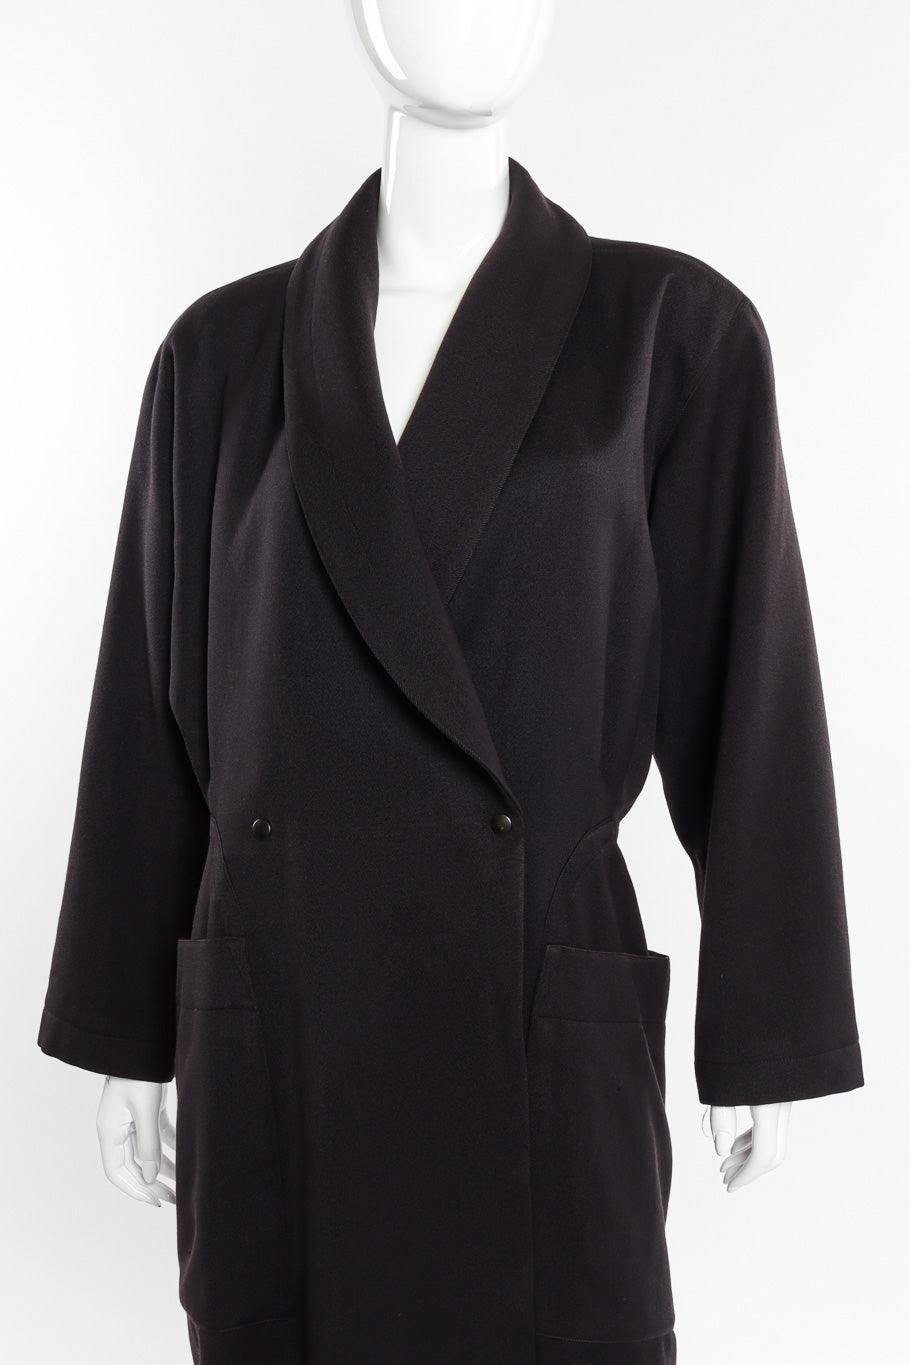 Vintage Alaia Oversized Double Breasted Wool Coat front view on mannequin closeup @recessla